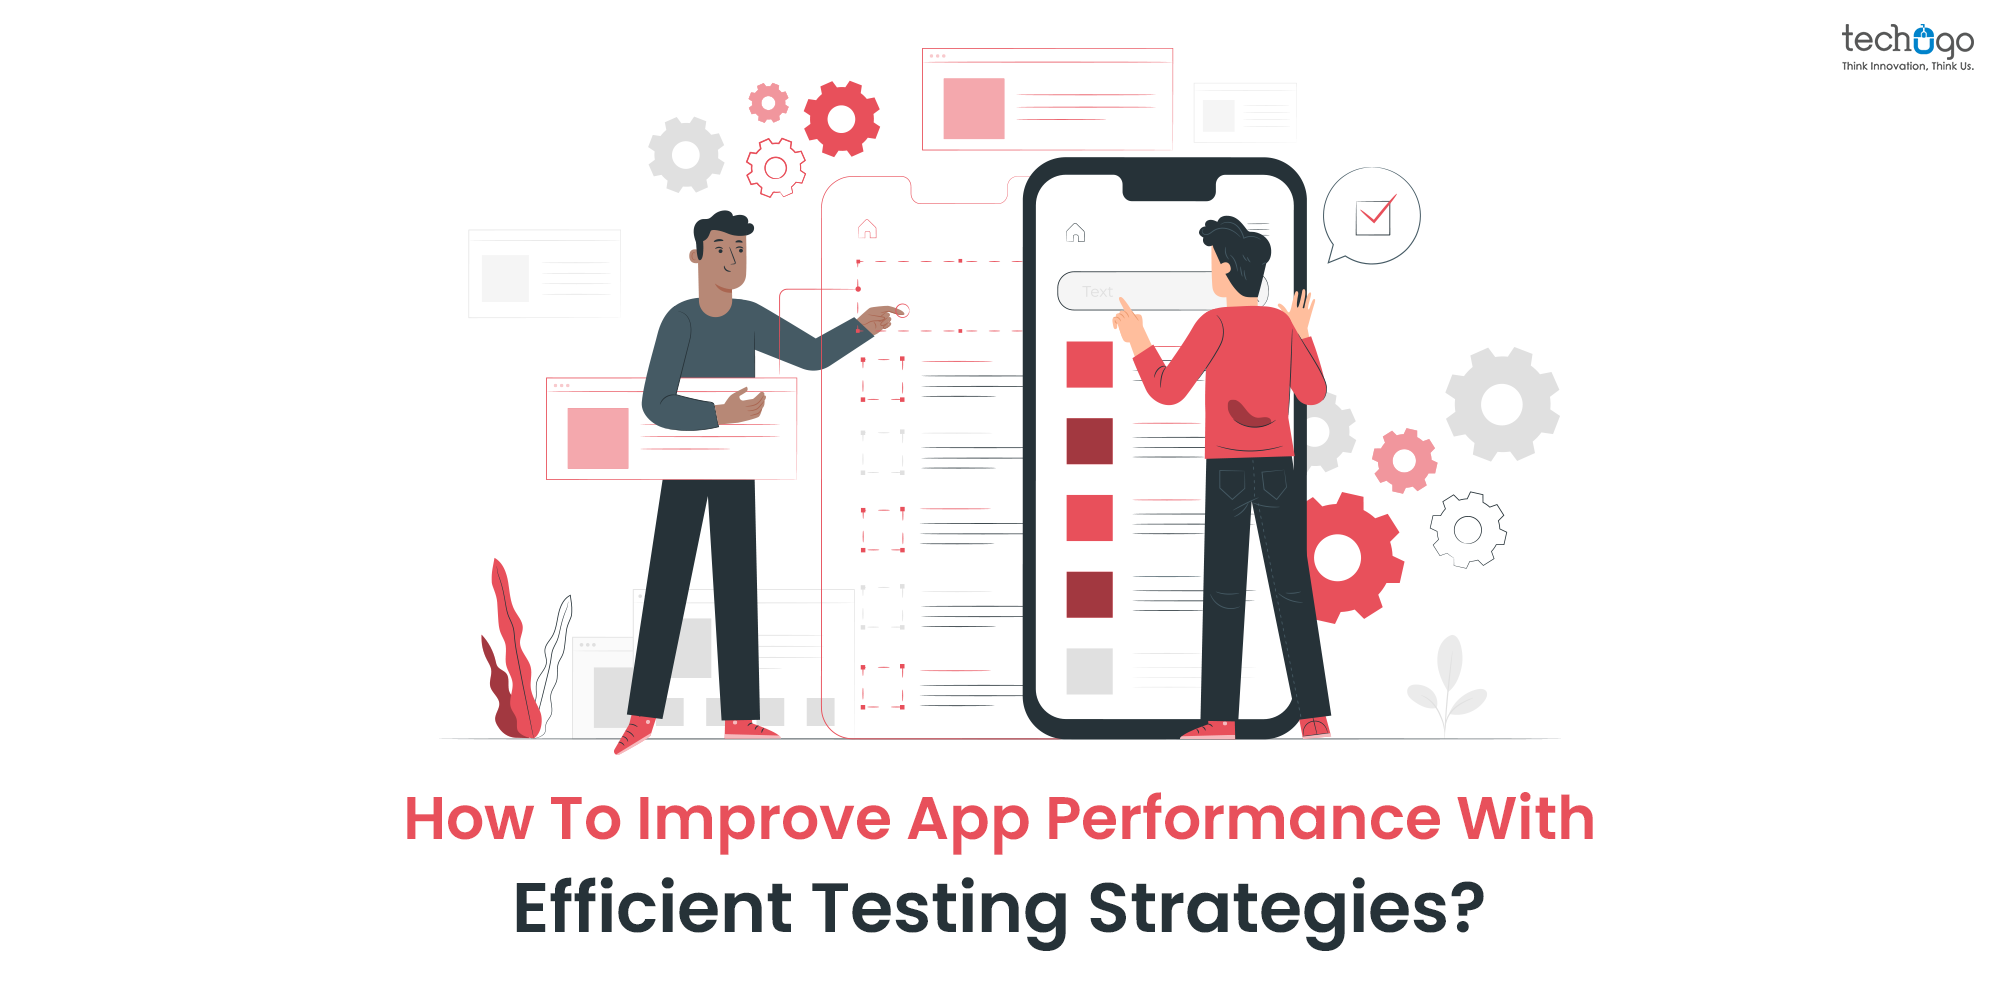 App testing elevates performance and triggers growth